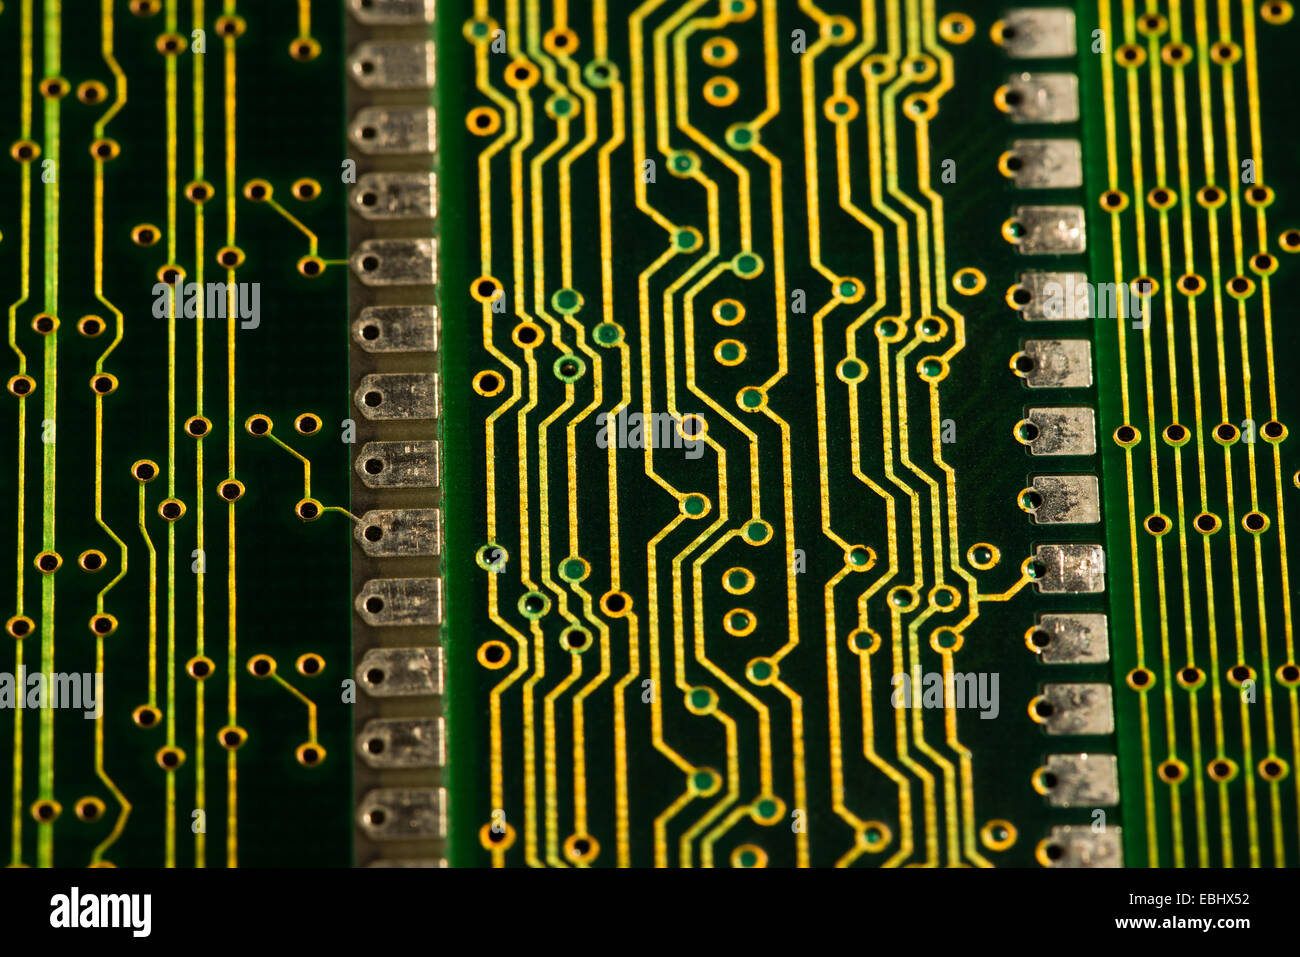 Electrical component parts of printed circuit boards at a macro level RAM surface mount technology golden printed conducting Stock Photo